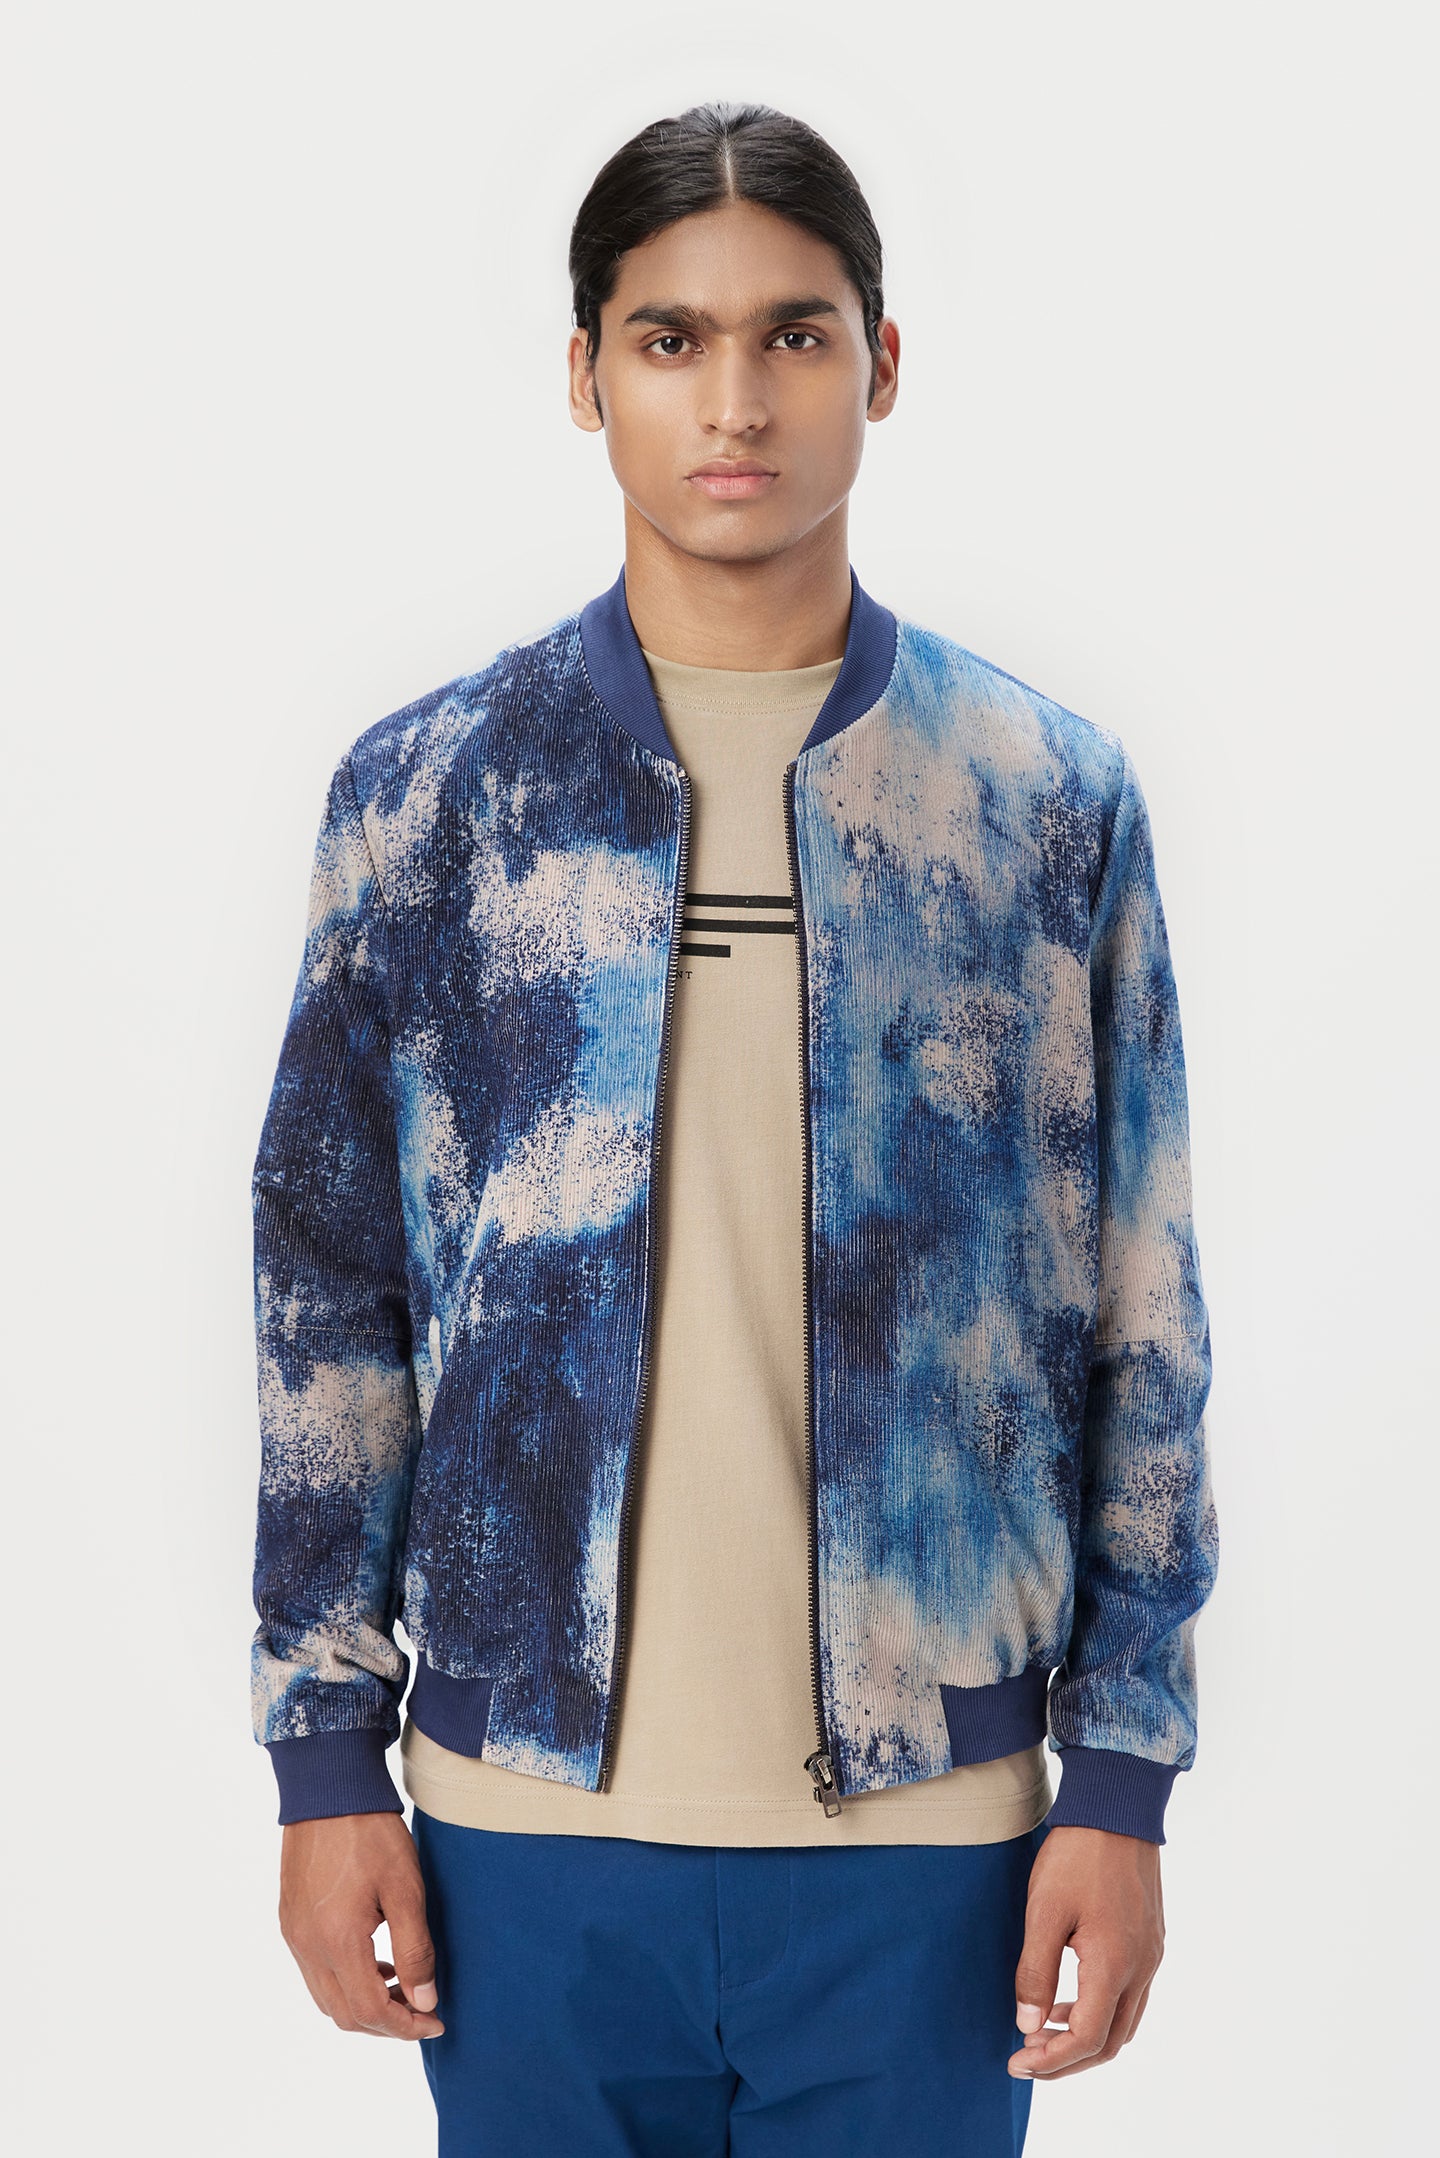 Easy Fit Bomber Jacket with Front Zipper Detail and All-Over Textured Print